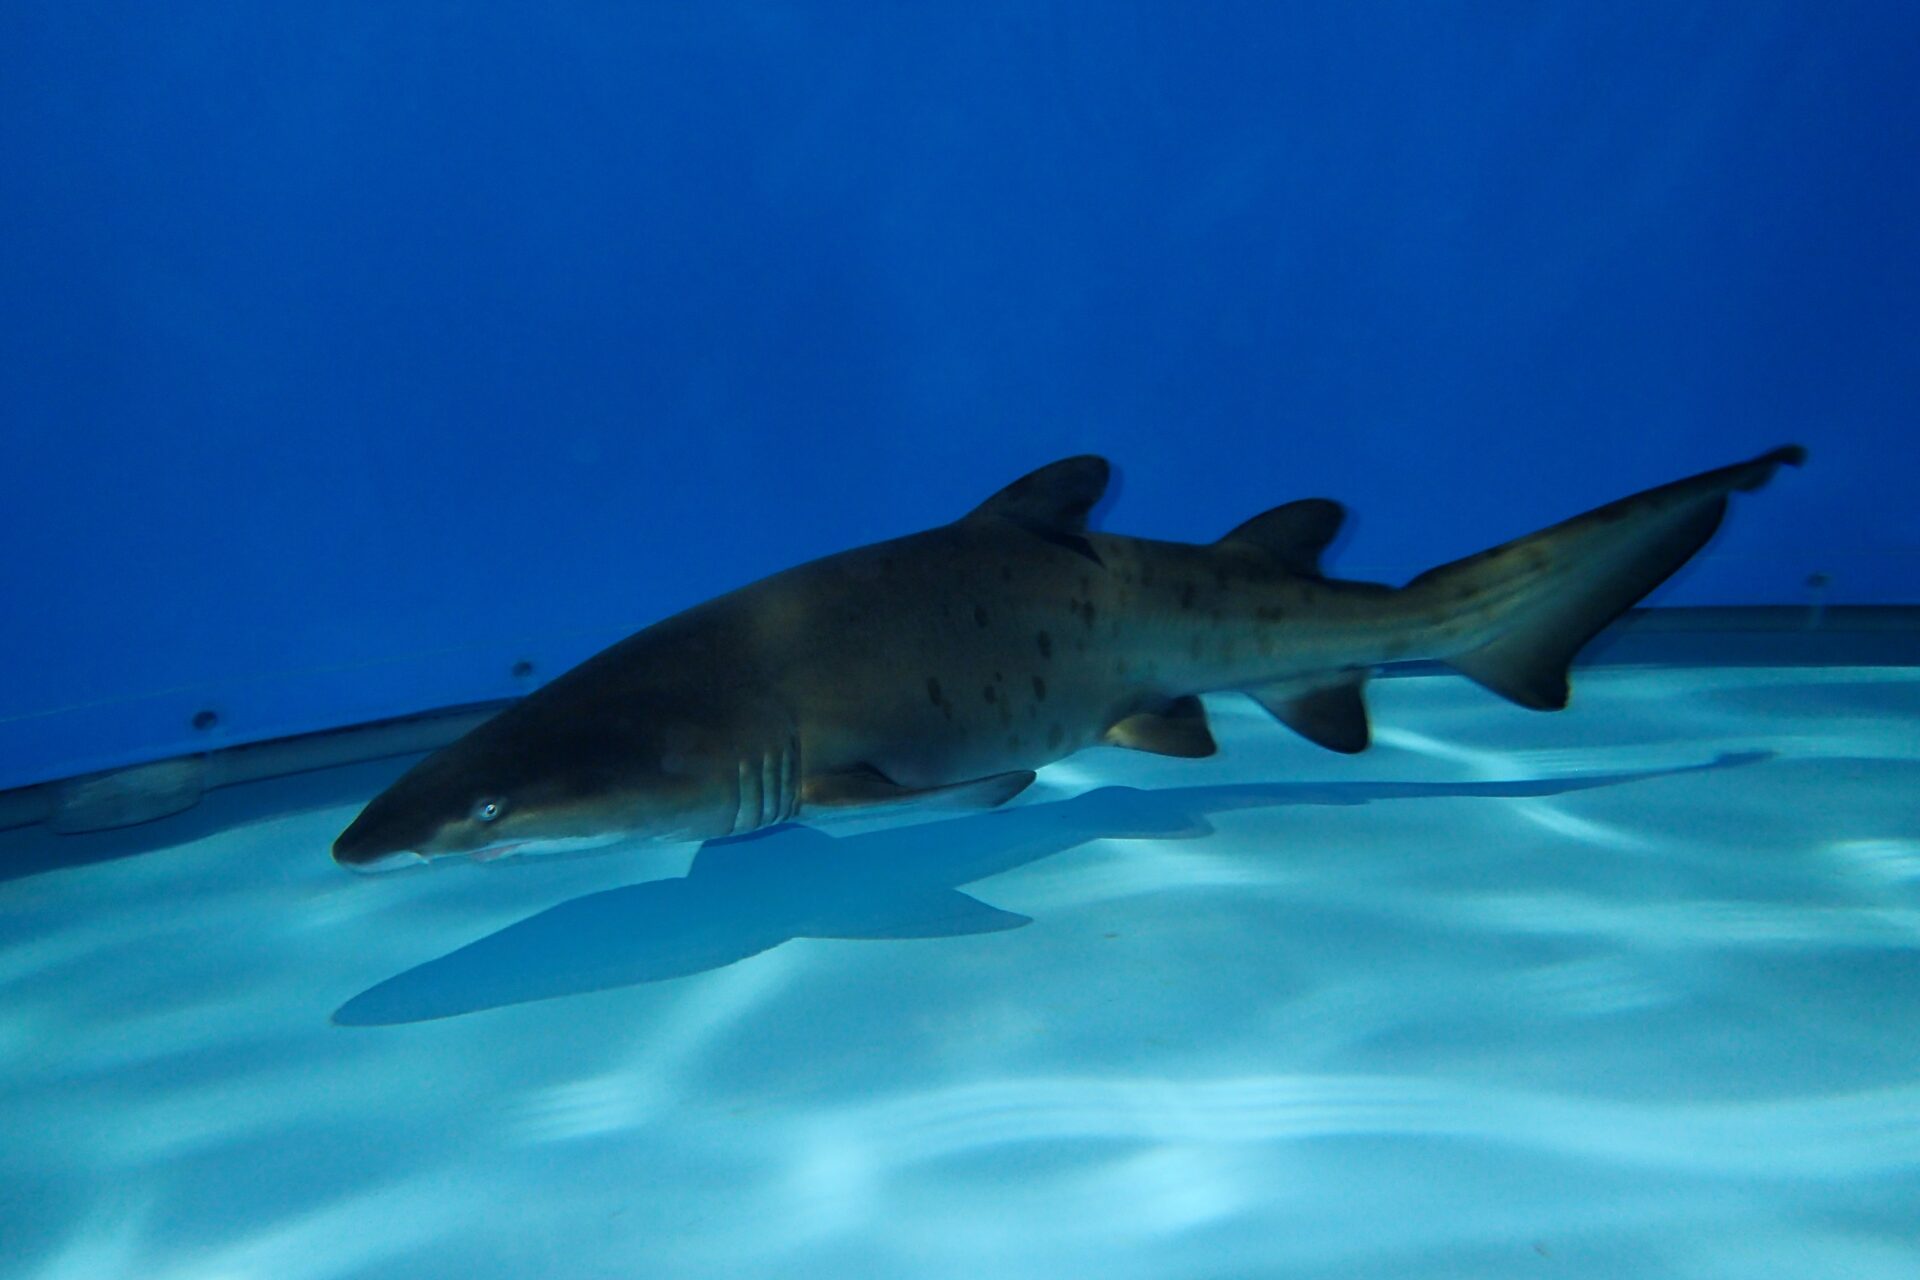 About death of sand tiger shark (individual number: No.10)